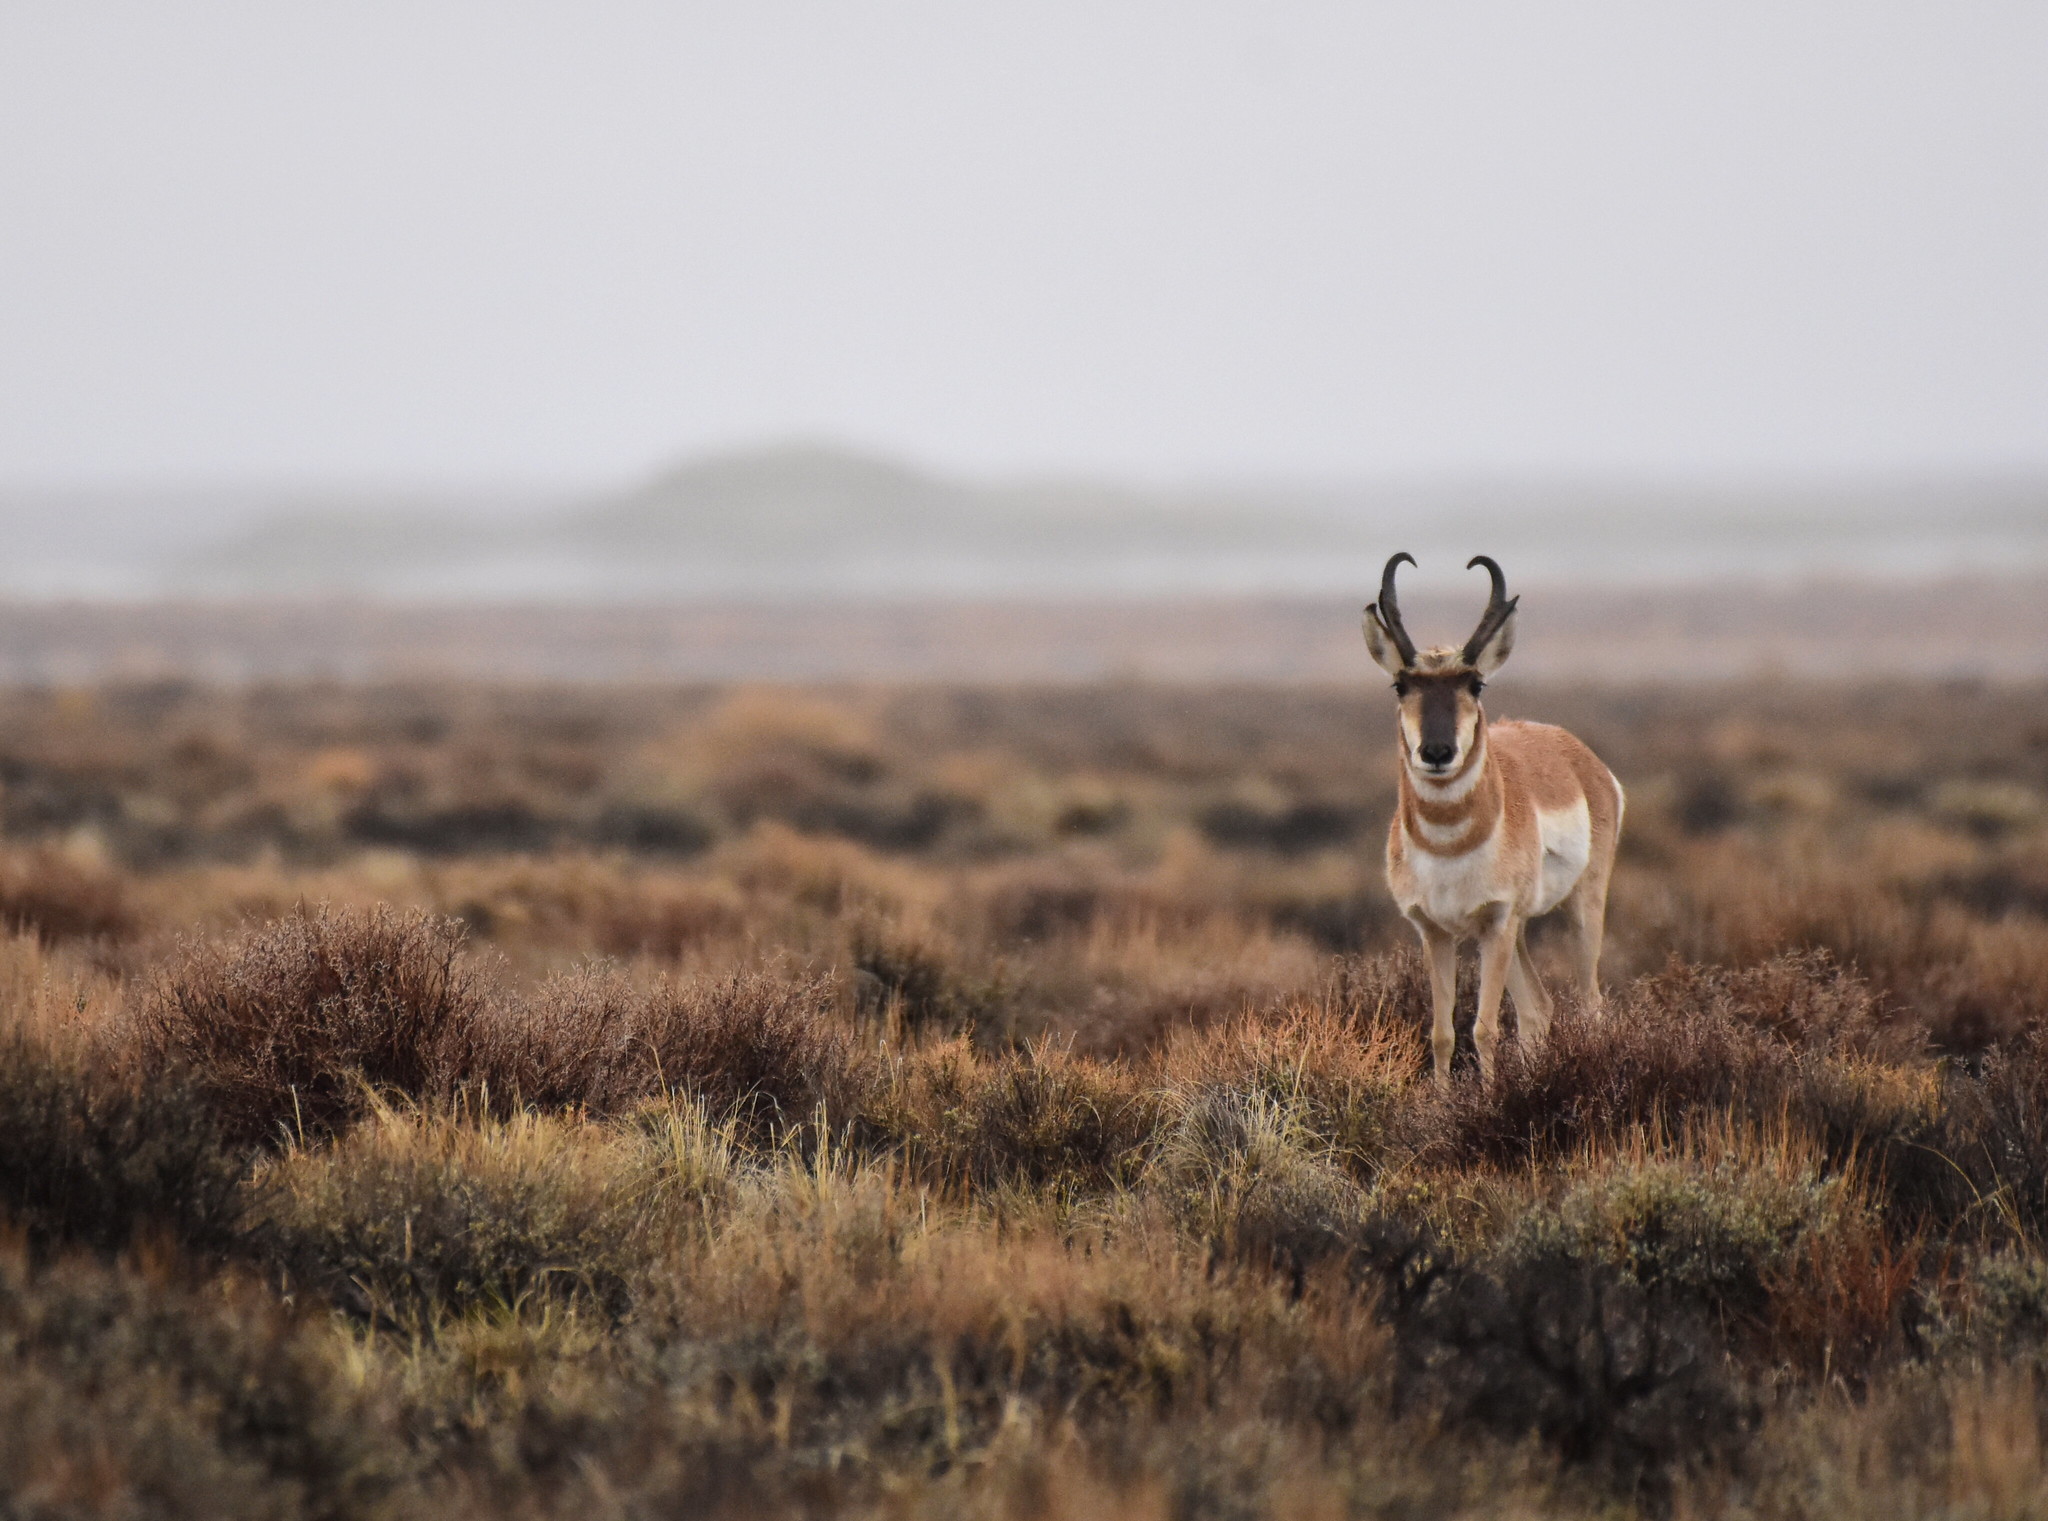 Pronghorn are being negatively impacted by drought and disease in wyoming.